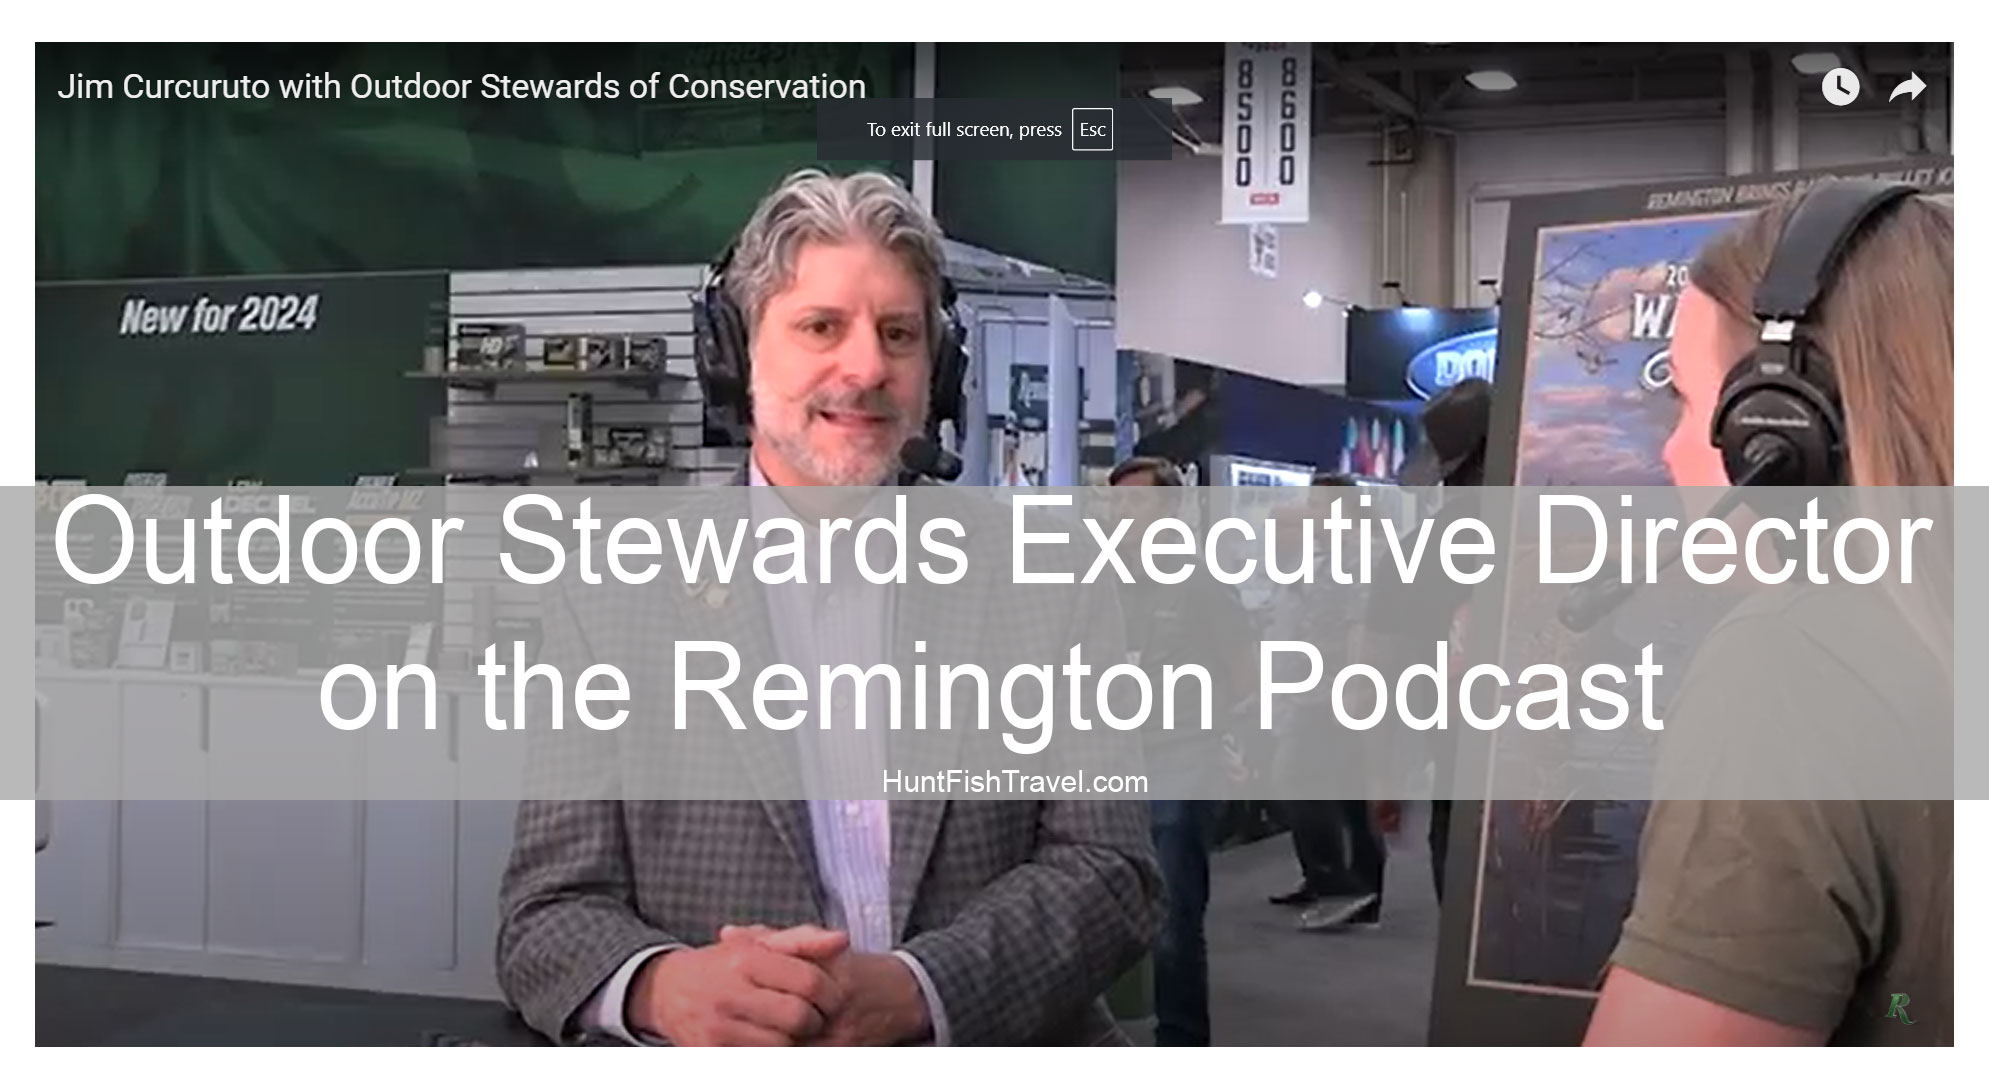 Outdoor Stewards Executive Director on the Remington Podcast